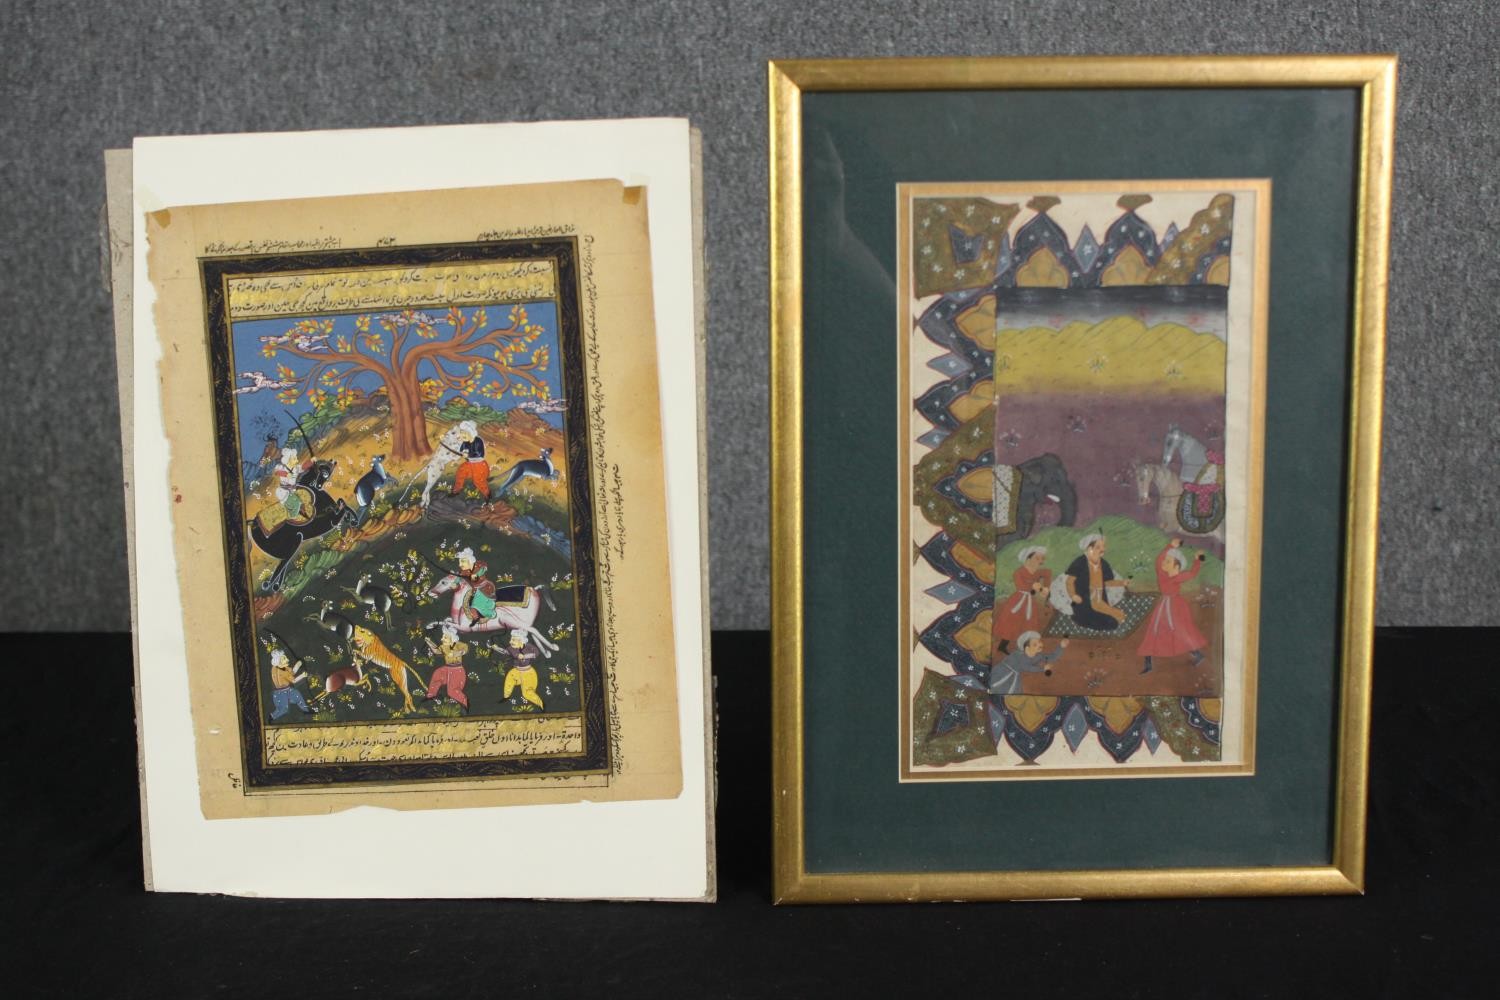 Two Indian Mughal paintings, one depicting a hunt, the other with courtiers, the largest in a glazed